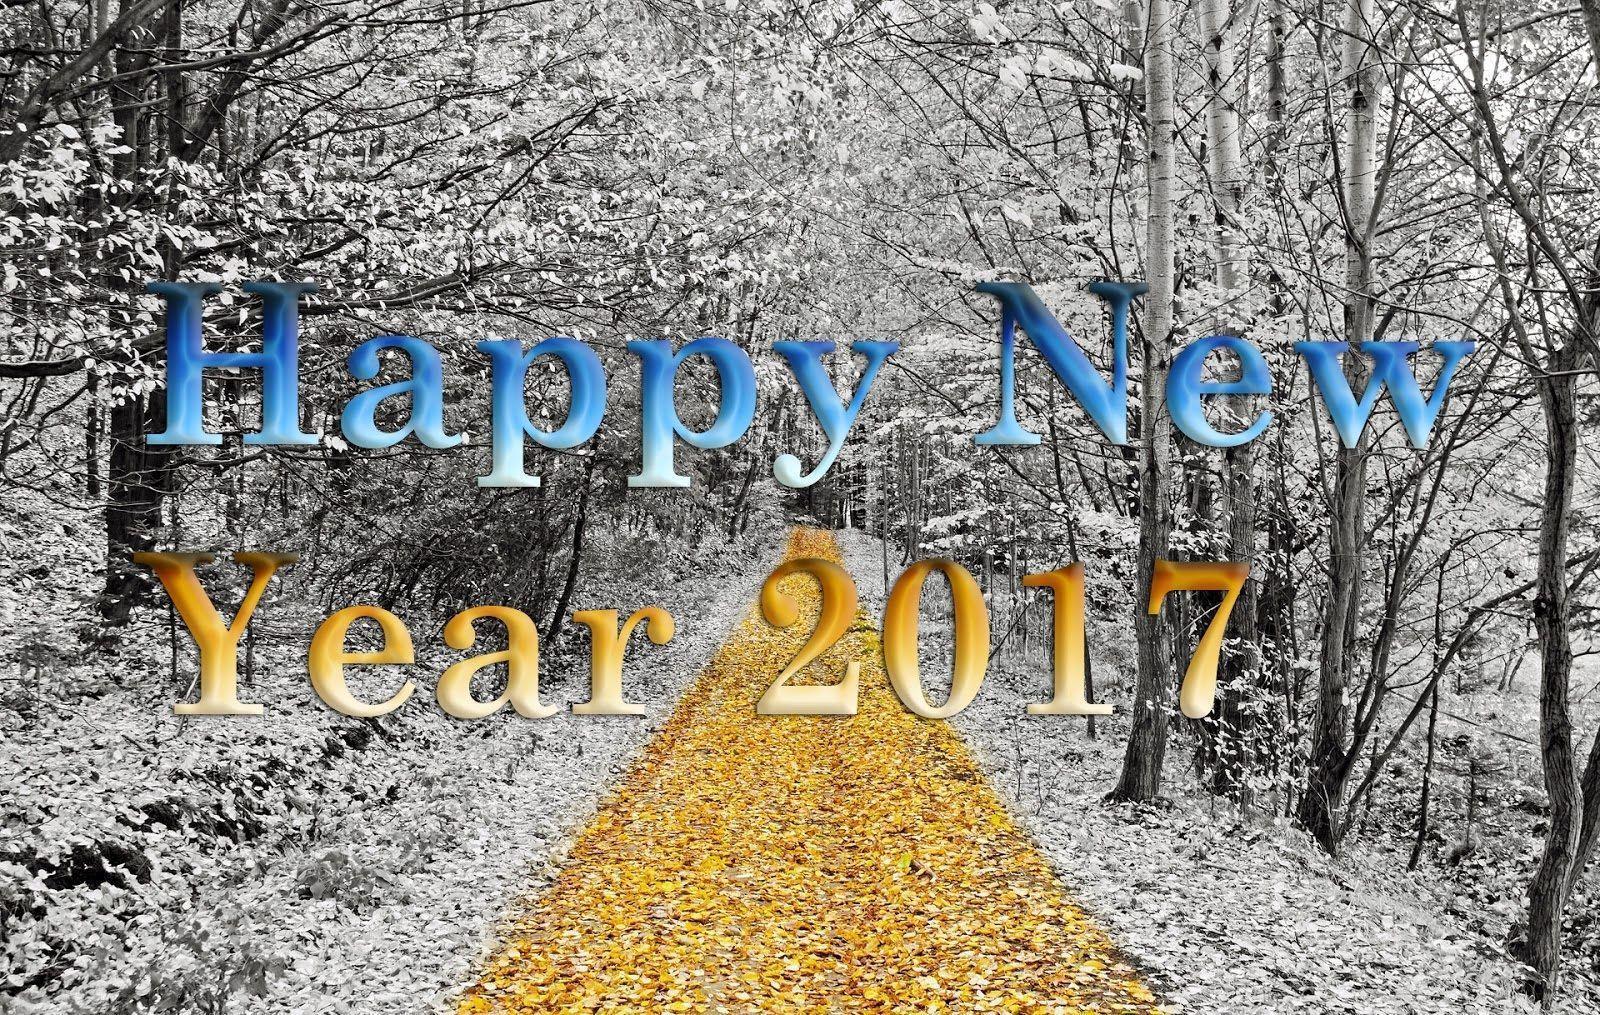 Happy New Year Wishes 2017